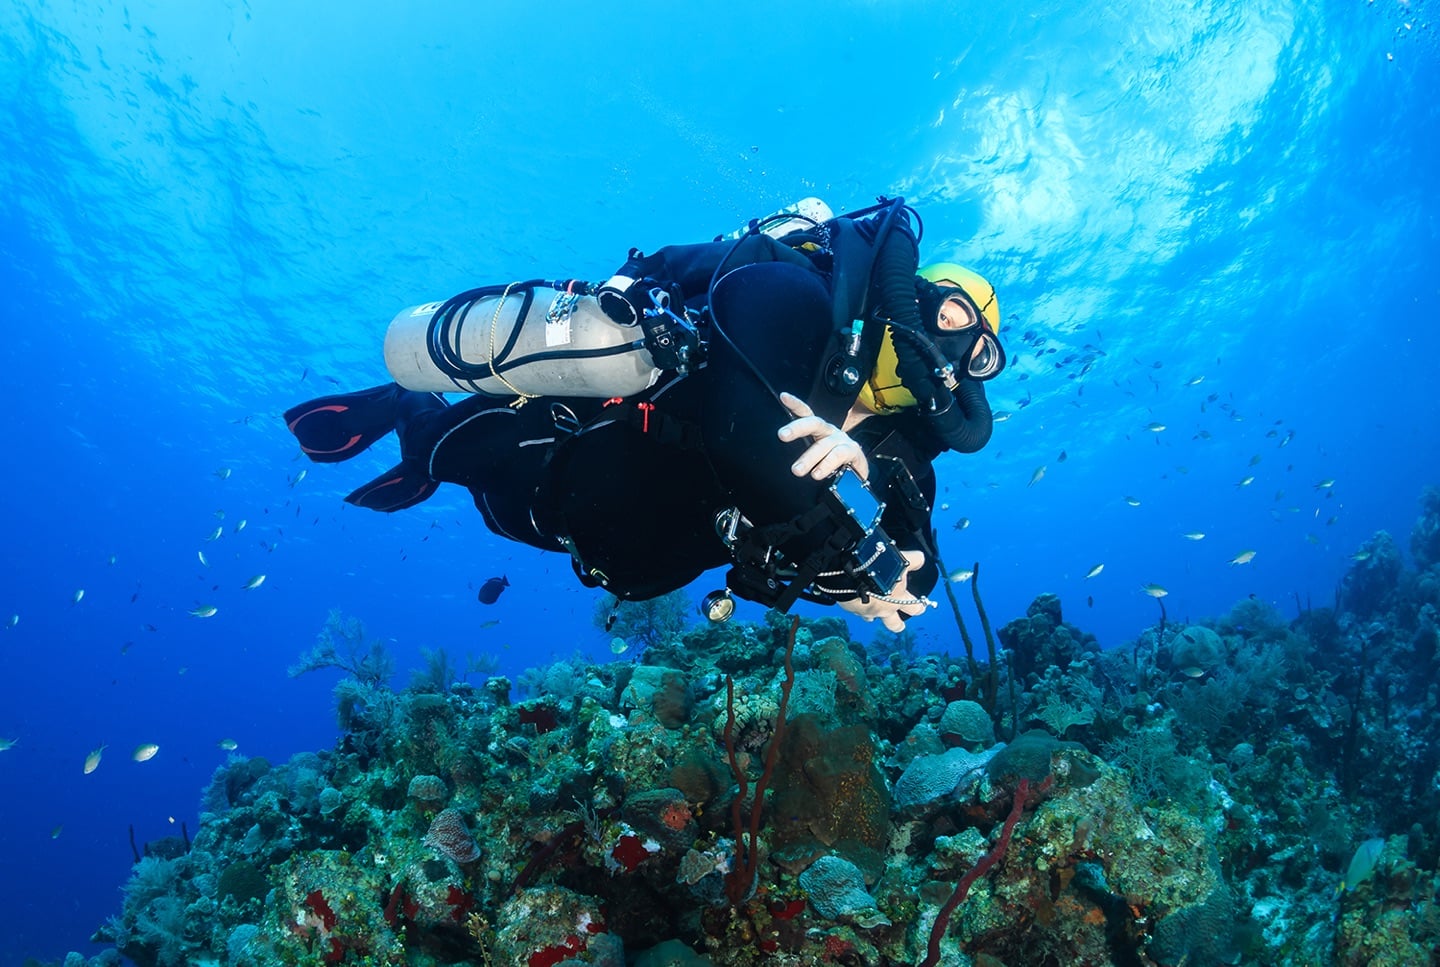 A scuba diver in the ocean looking at the camera